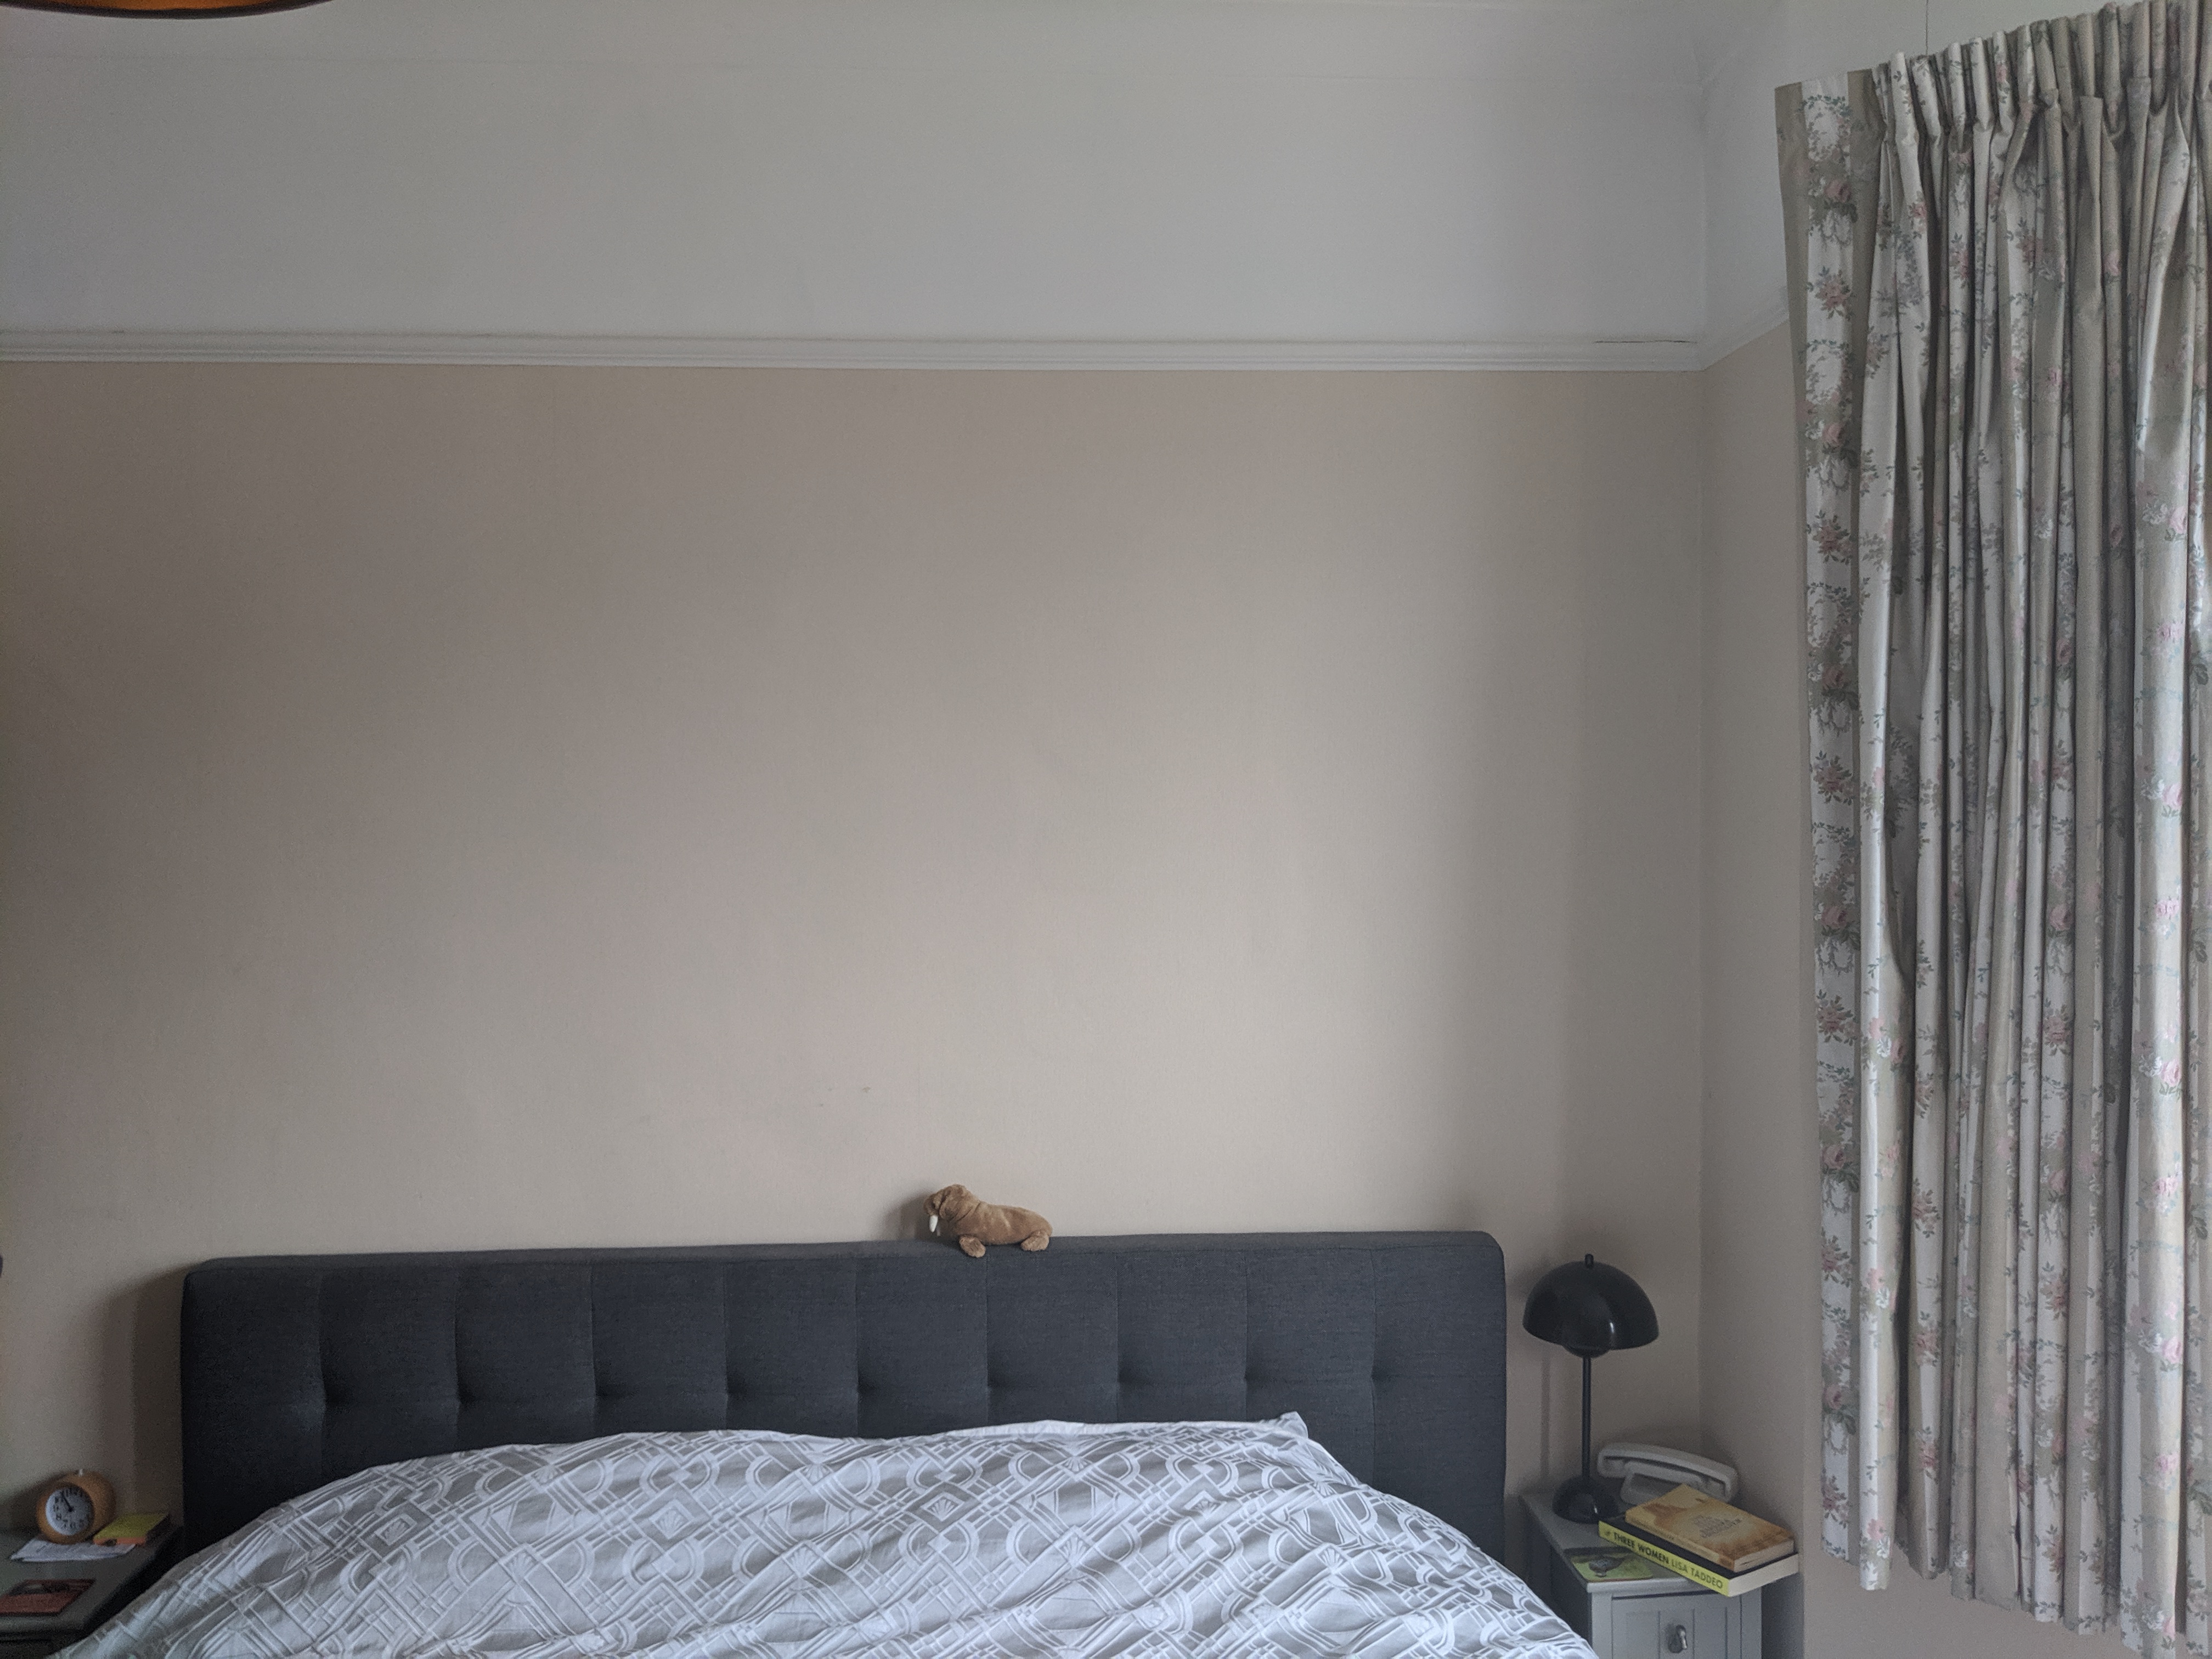 A before photo of the the client's beige bedroom.